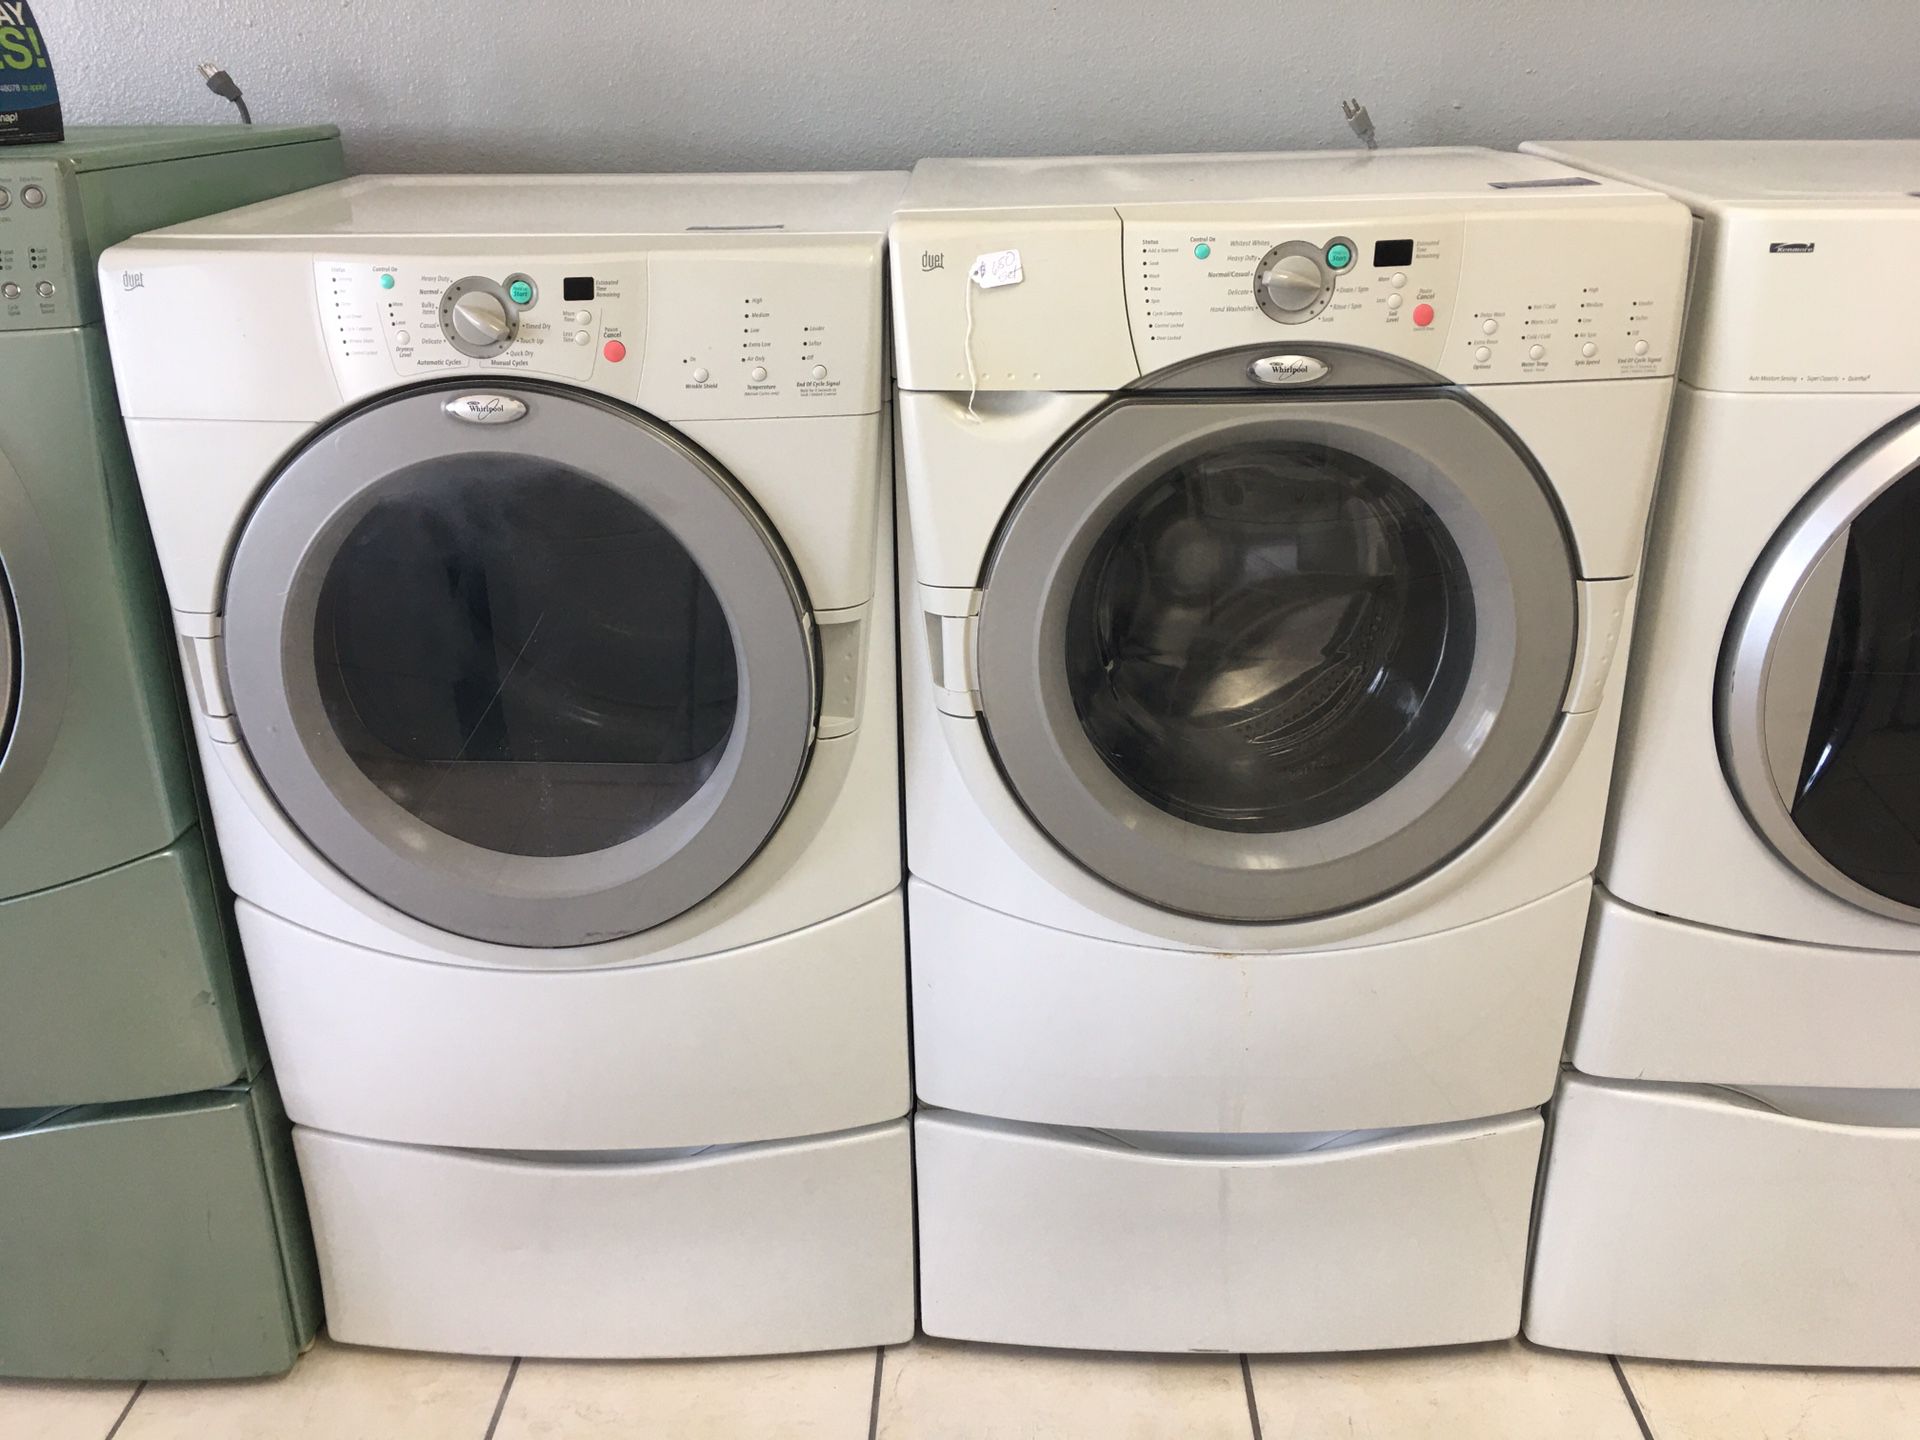 Whirlpool front load washer and dryer set with pedestals